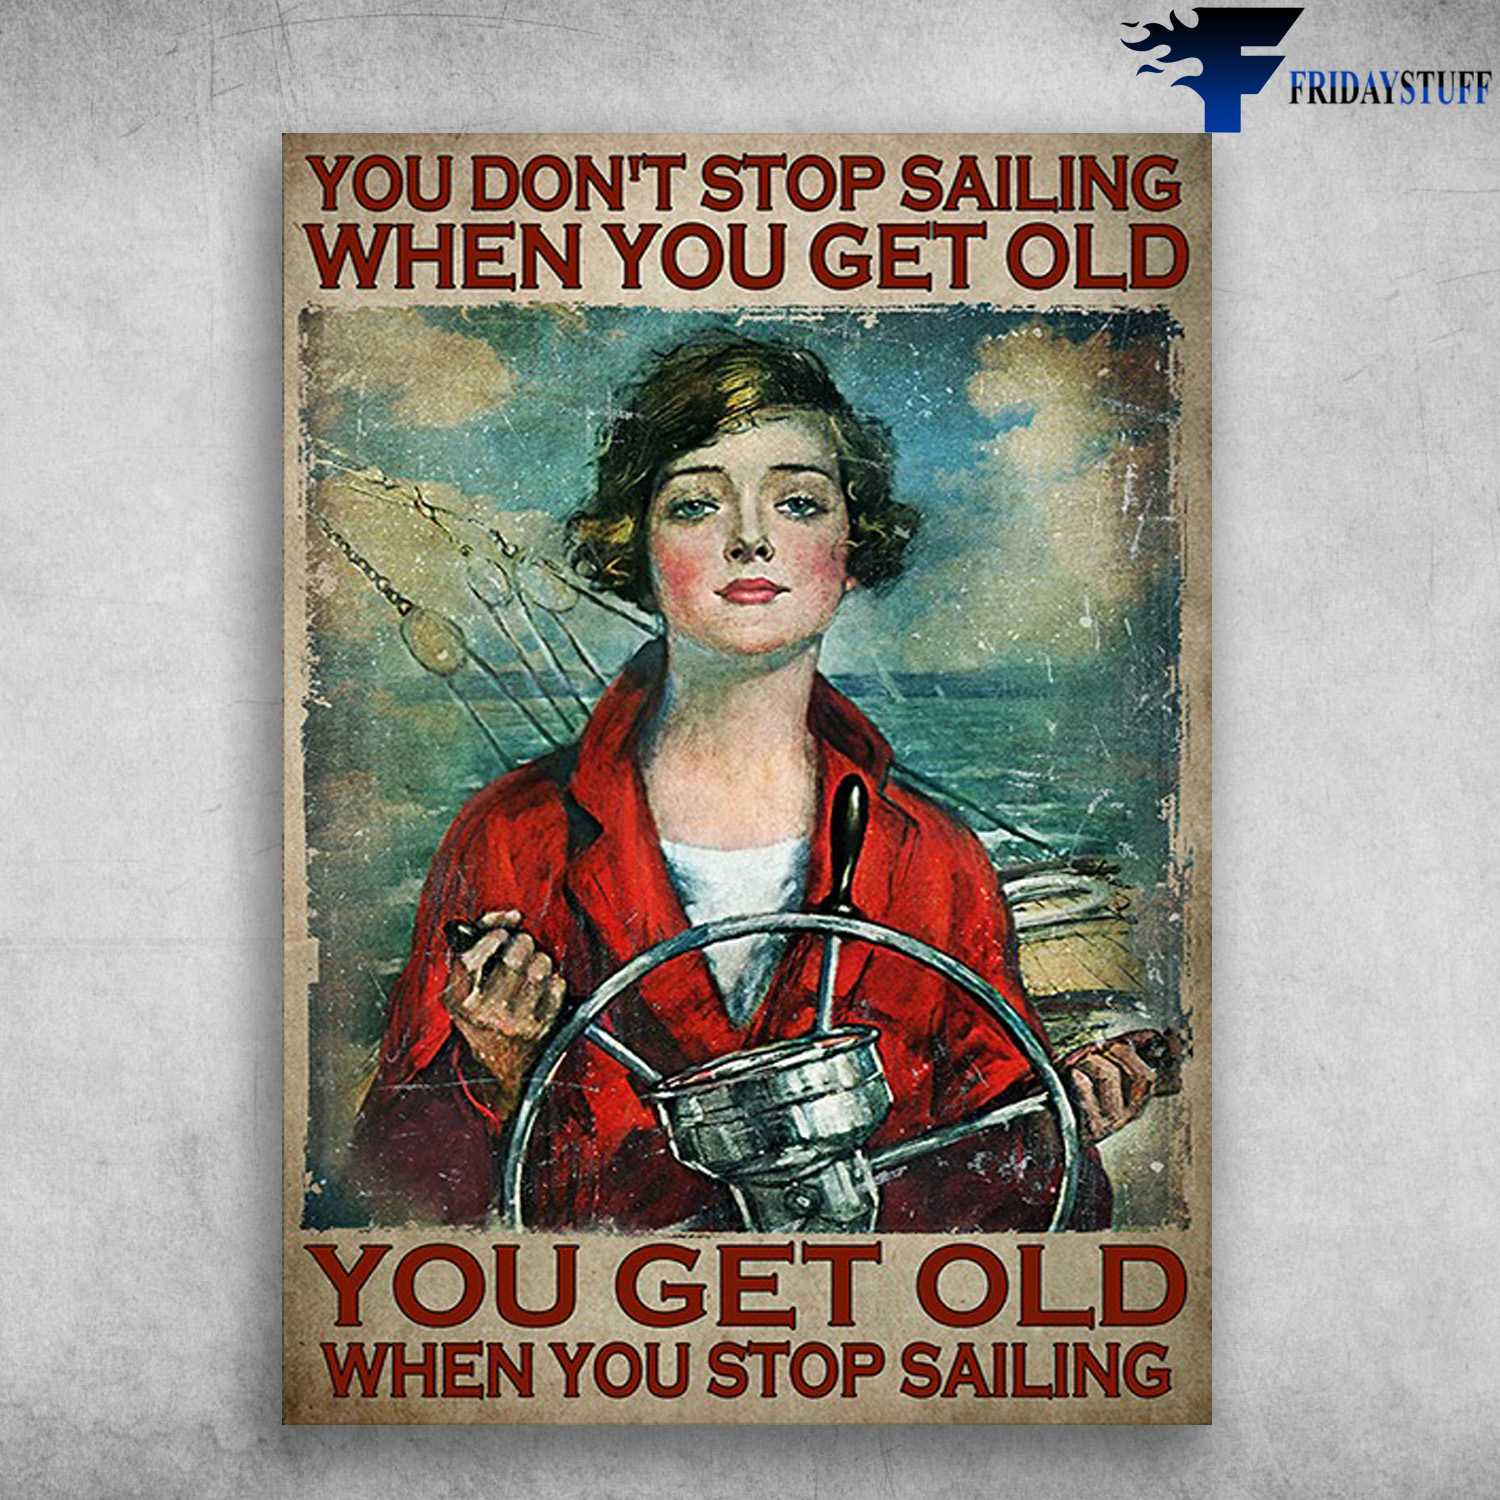 Female Sailor - You Don't Stop Sailing When You Get Old, You Get Old When You Stop Sailing